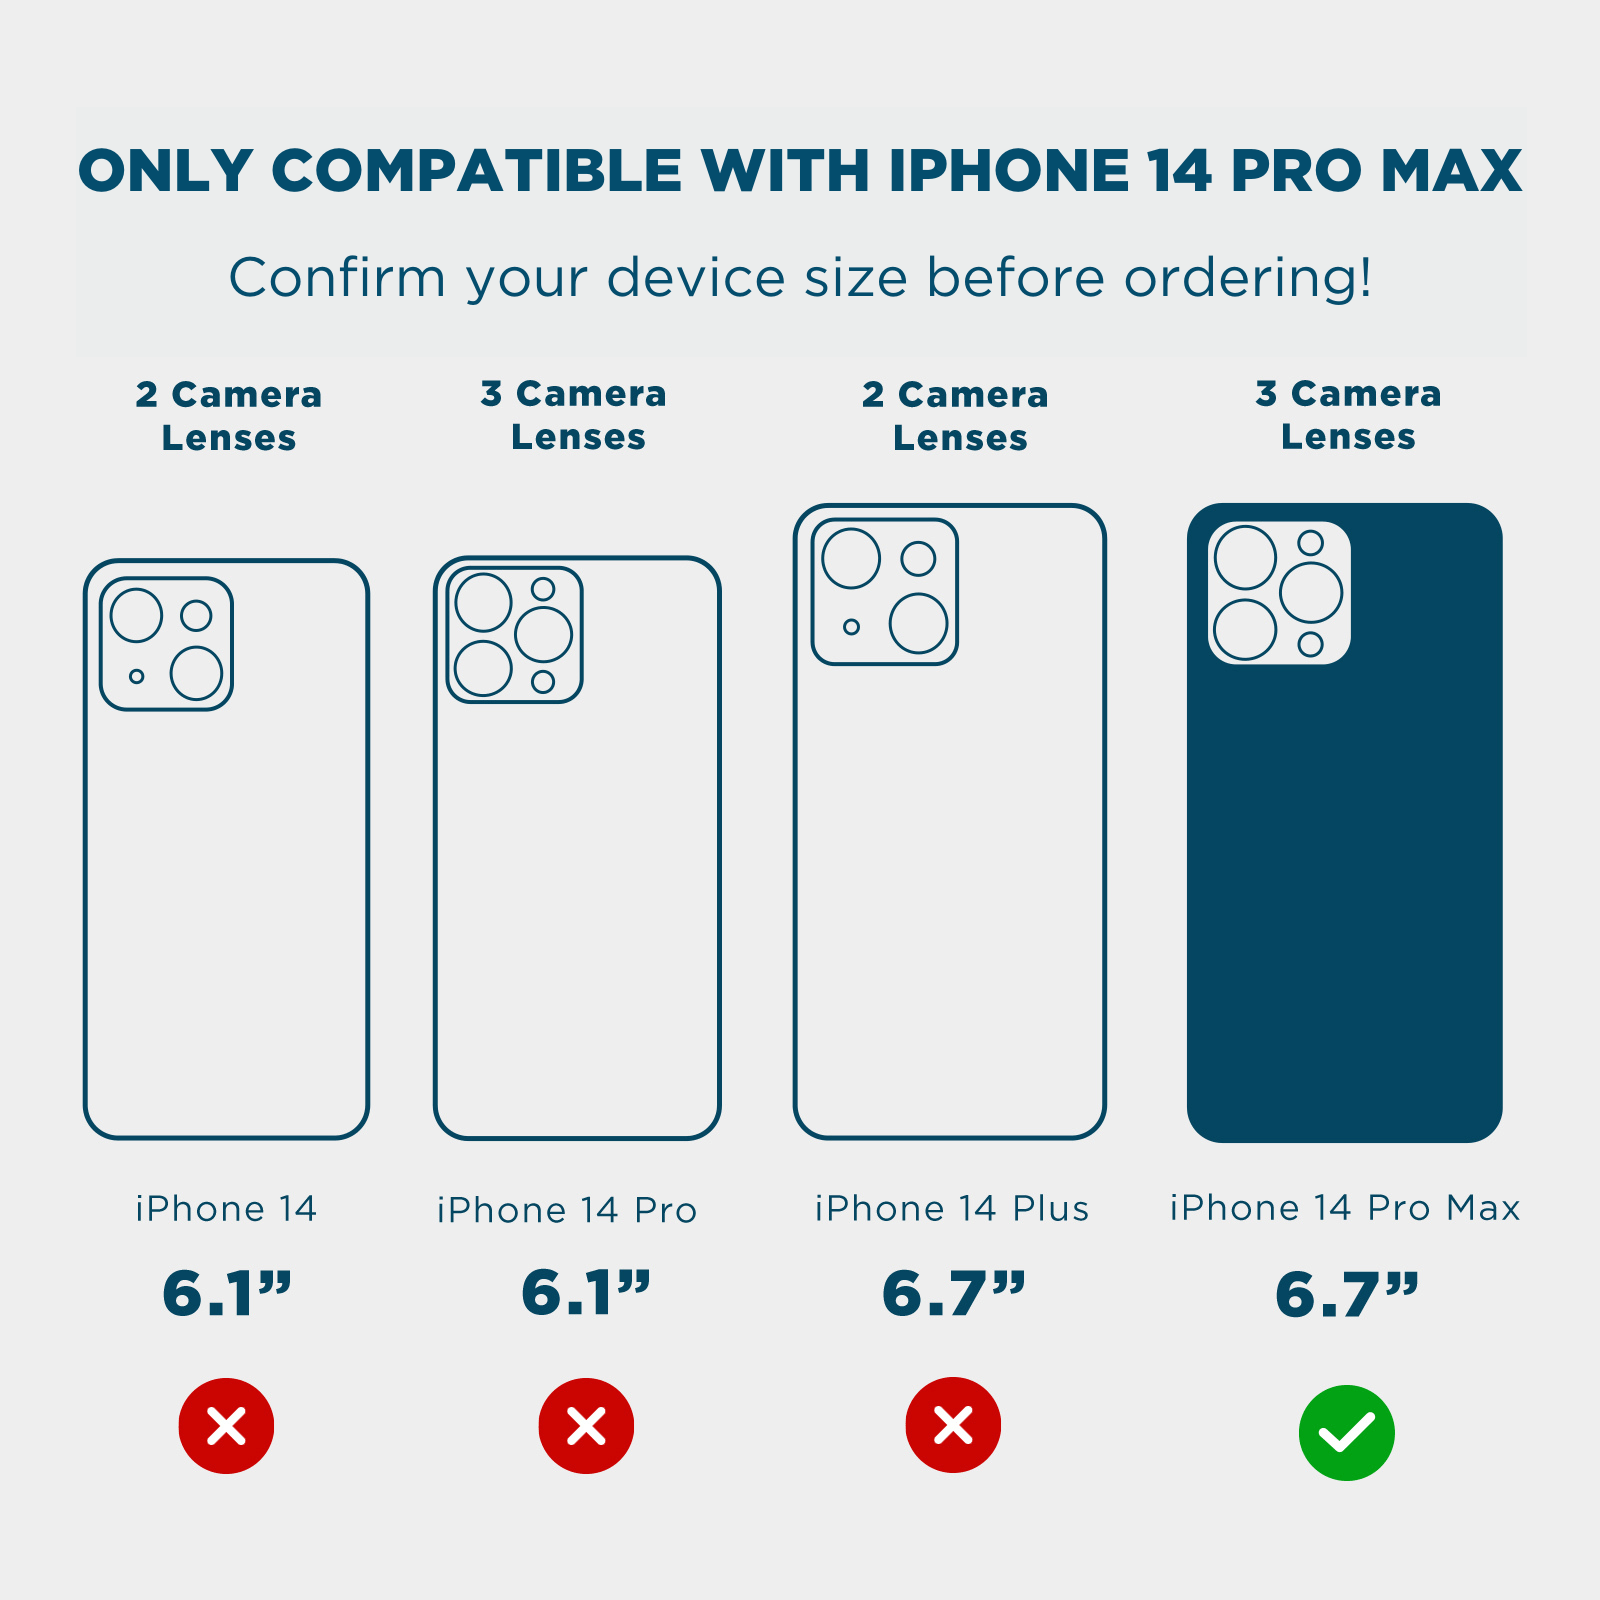 ONLY COMPATIBLE WITH IPHONE 14 PRO MAX. CONFIRM YOUR DEVICE SIZE BEFORE ORDERING. 2 CAMERA LENSES, 3 CAMERA LENSES, 2 CAMERA LENSES, 3 CAMERA LENSES, 6.1, 6.1, 6.7, 6.7. COLOR::SOAP BUBBLE